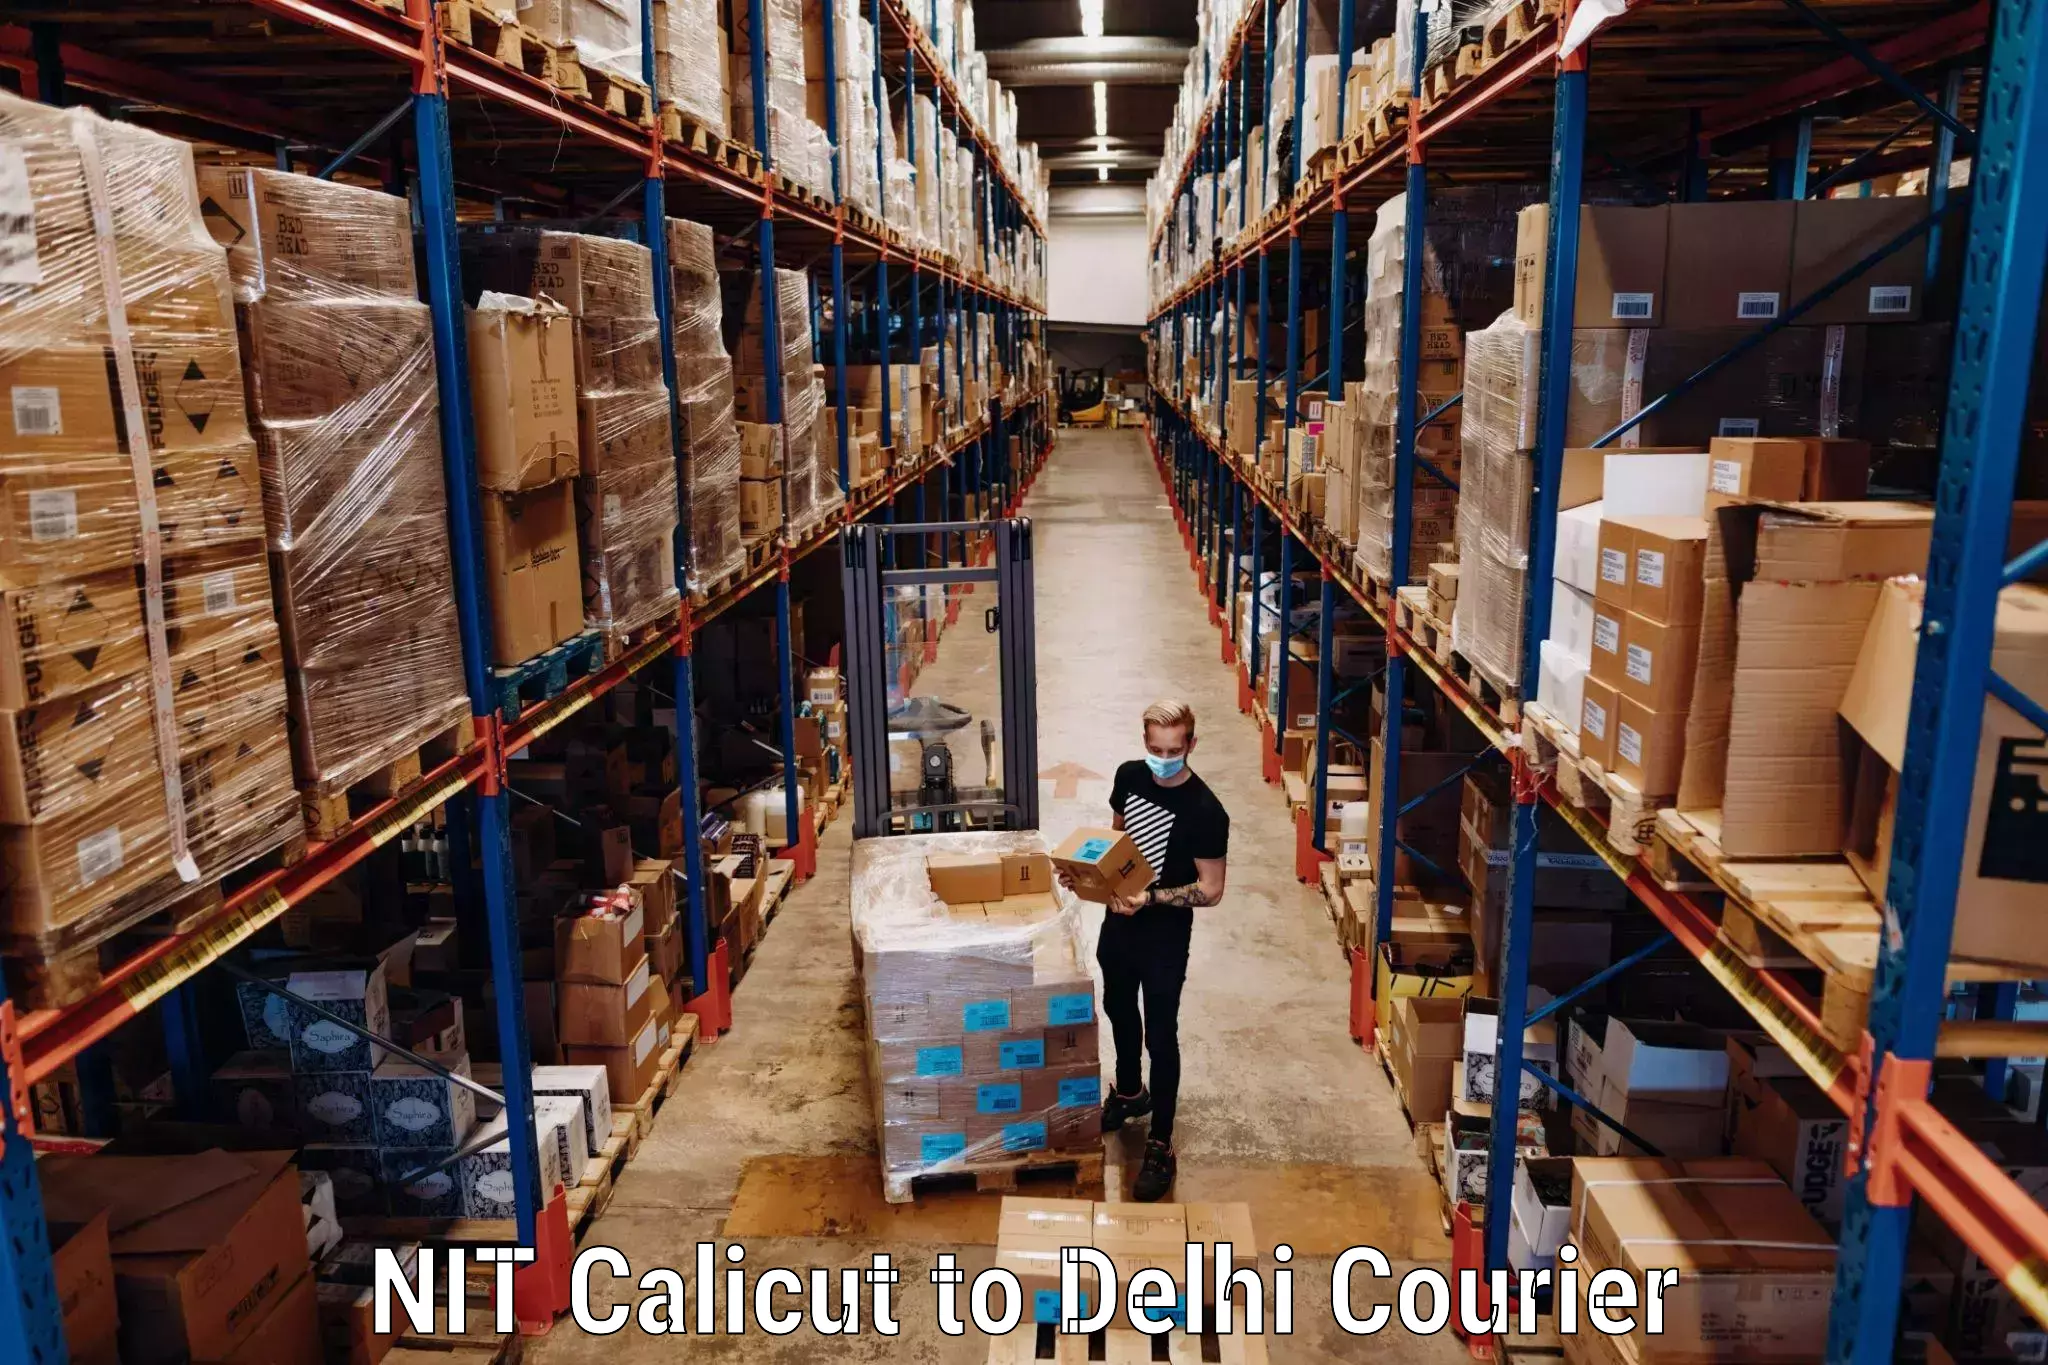 Excess baggage transport in NIT Calicut to Delhi